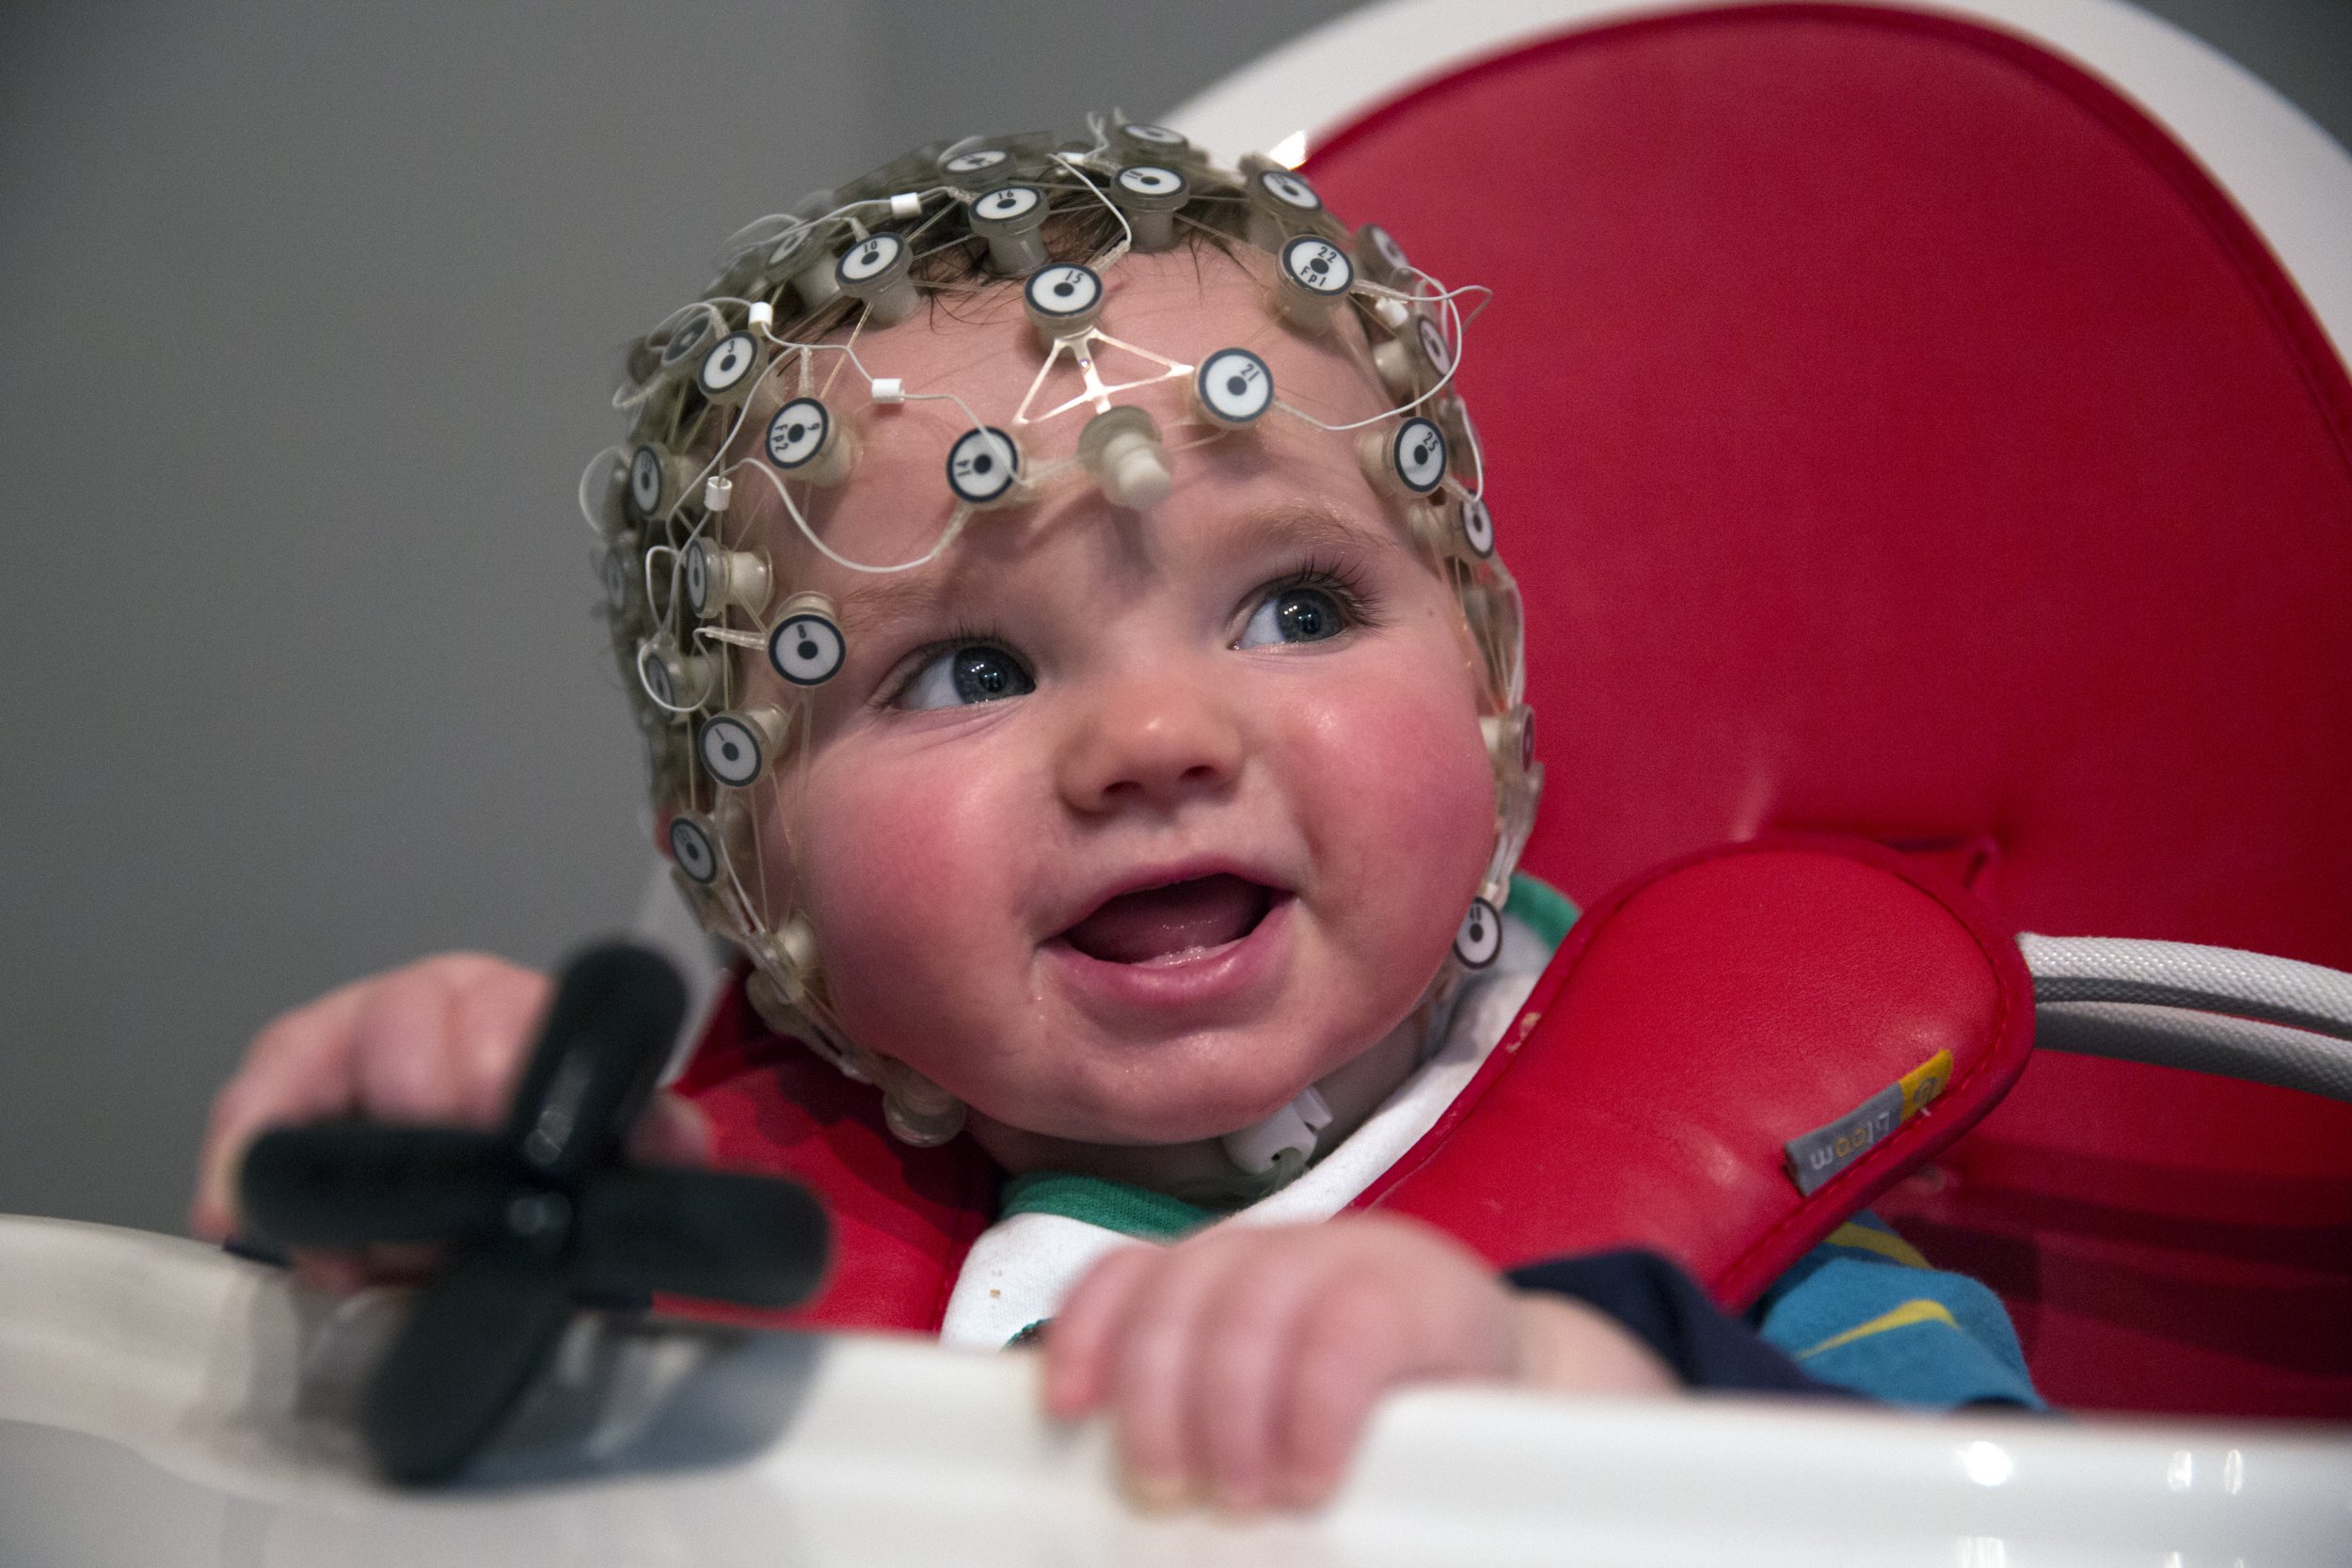 A baby has its brain studied in London